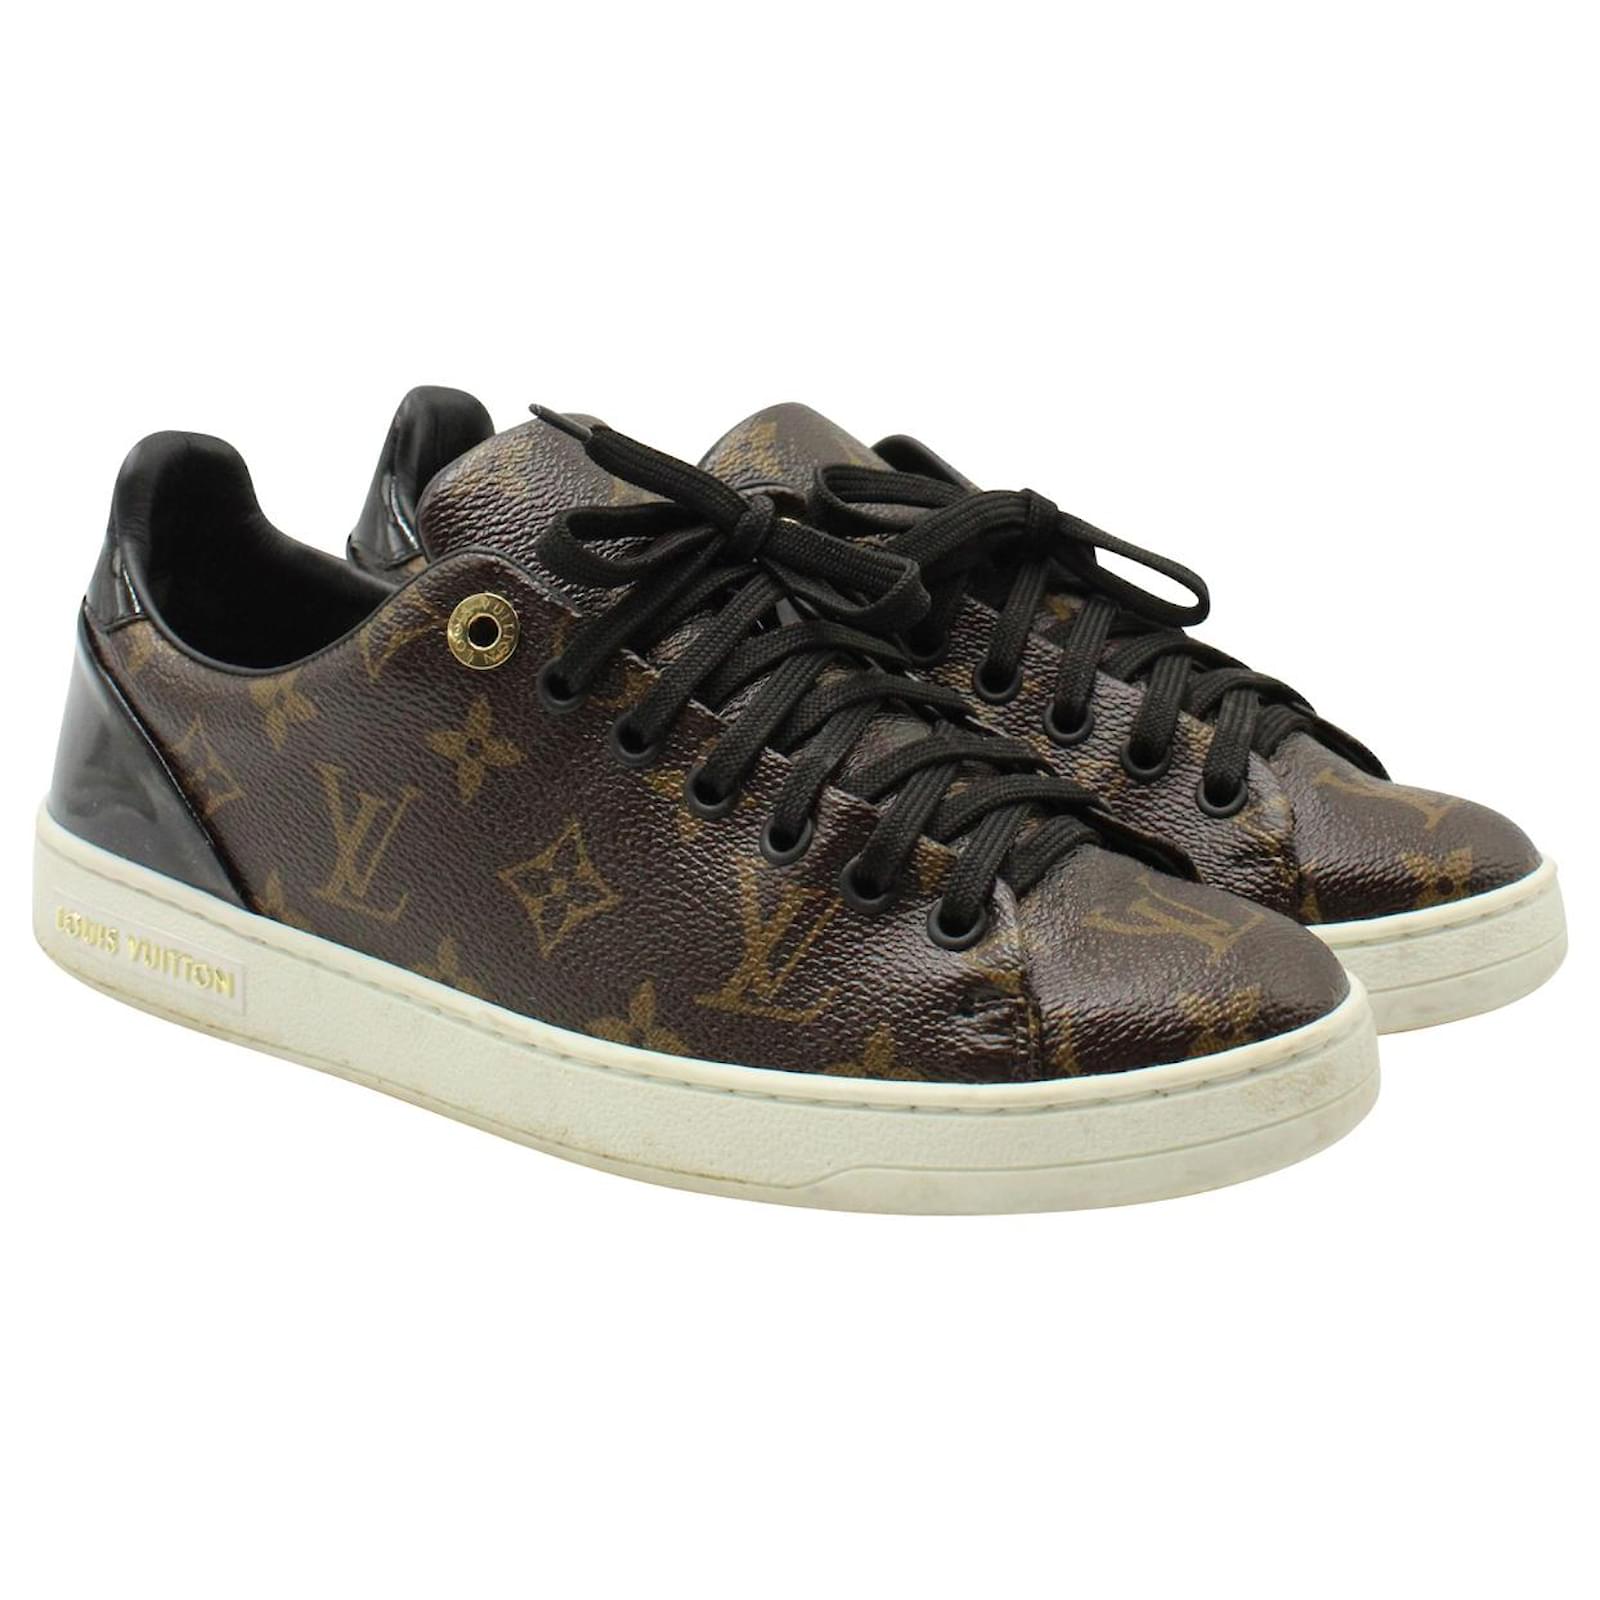 Tops Louis Vuitton Louis Vuitton FRONTROW Lace Up Sneakers in Brown Monogram Canvas